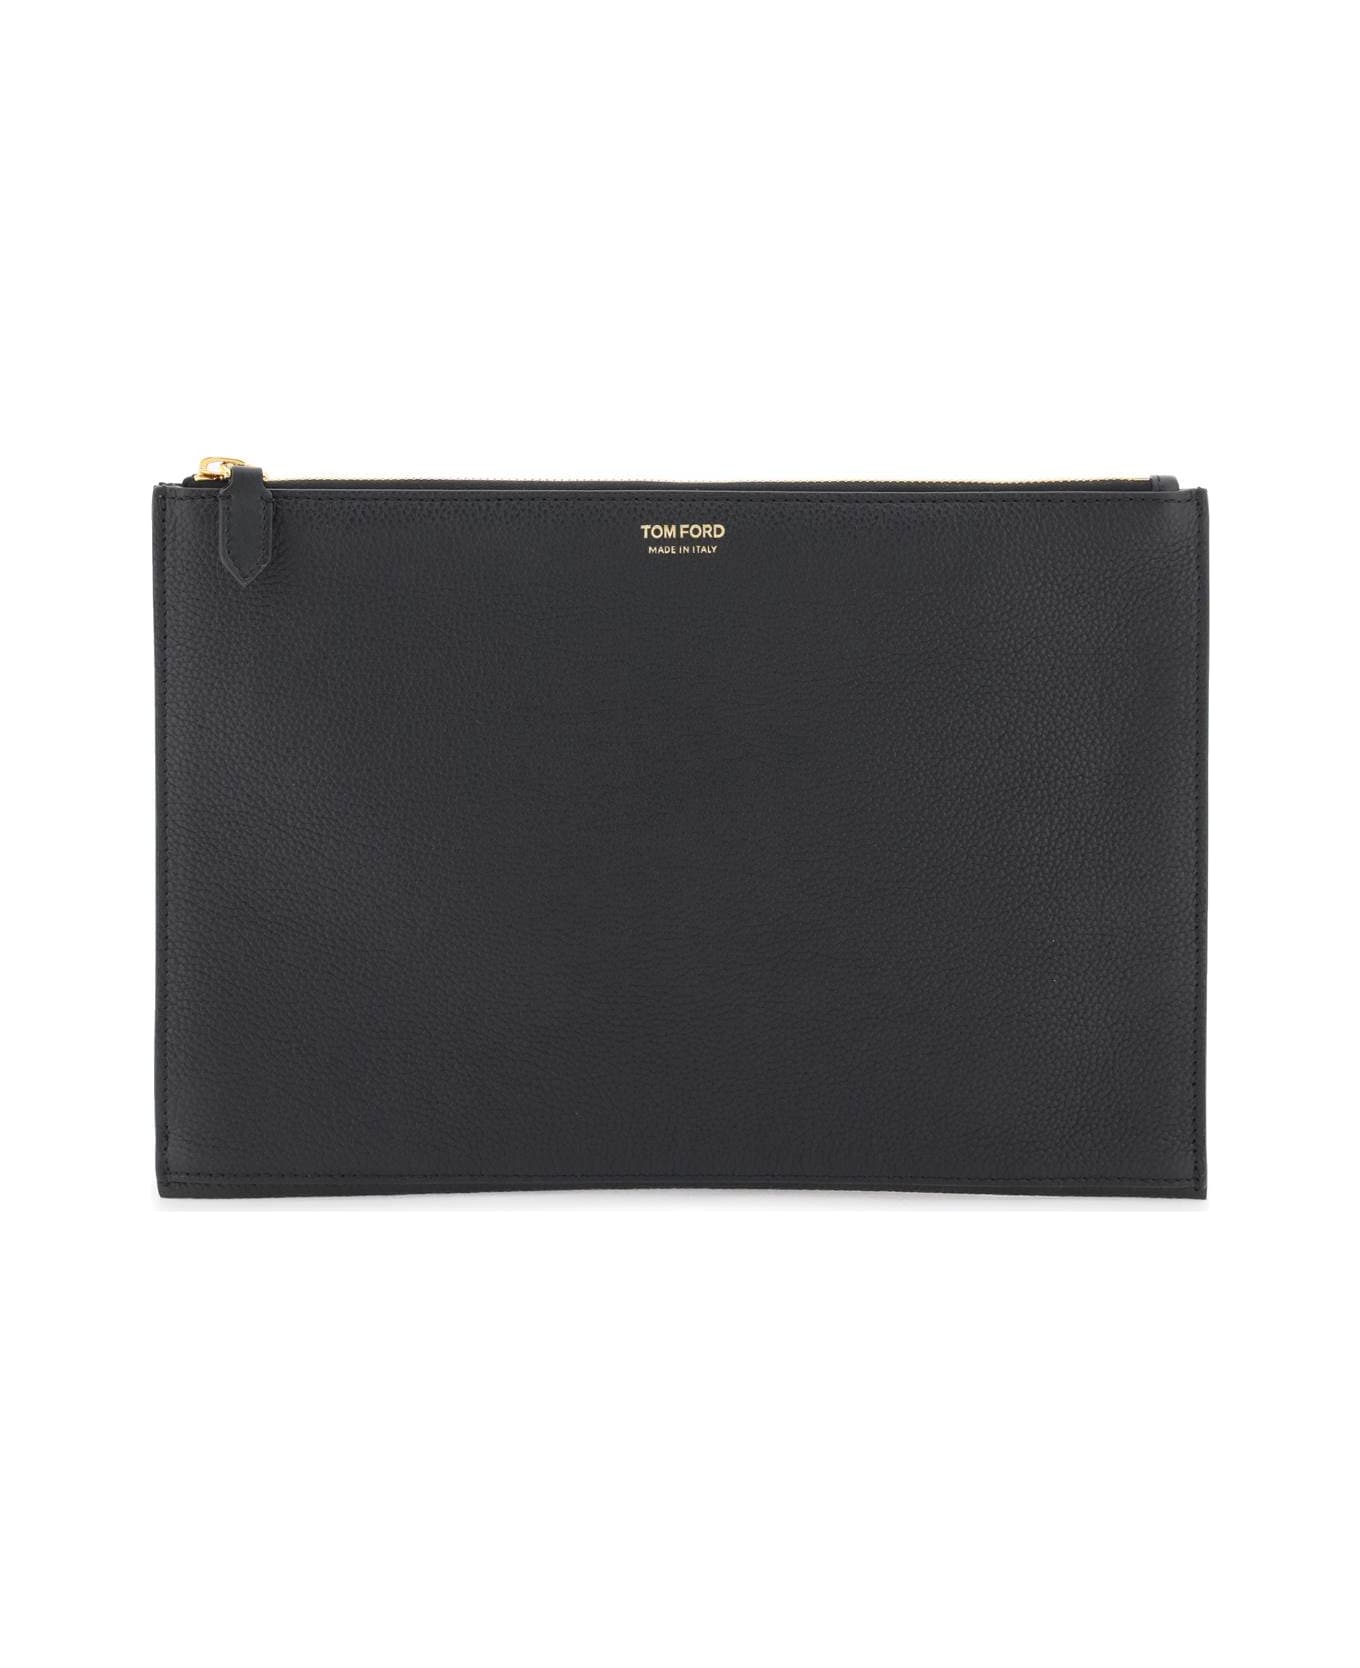 Tom Ford Grained Leather Pouch - BLACK (Black)